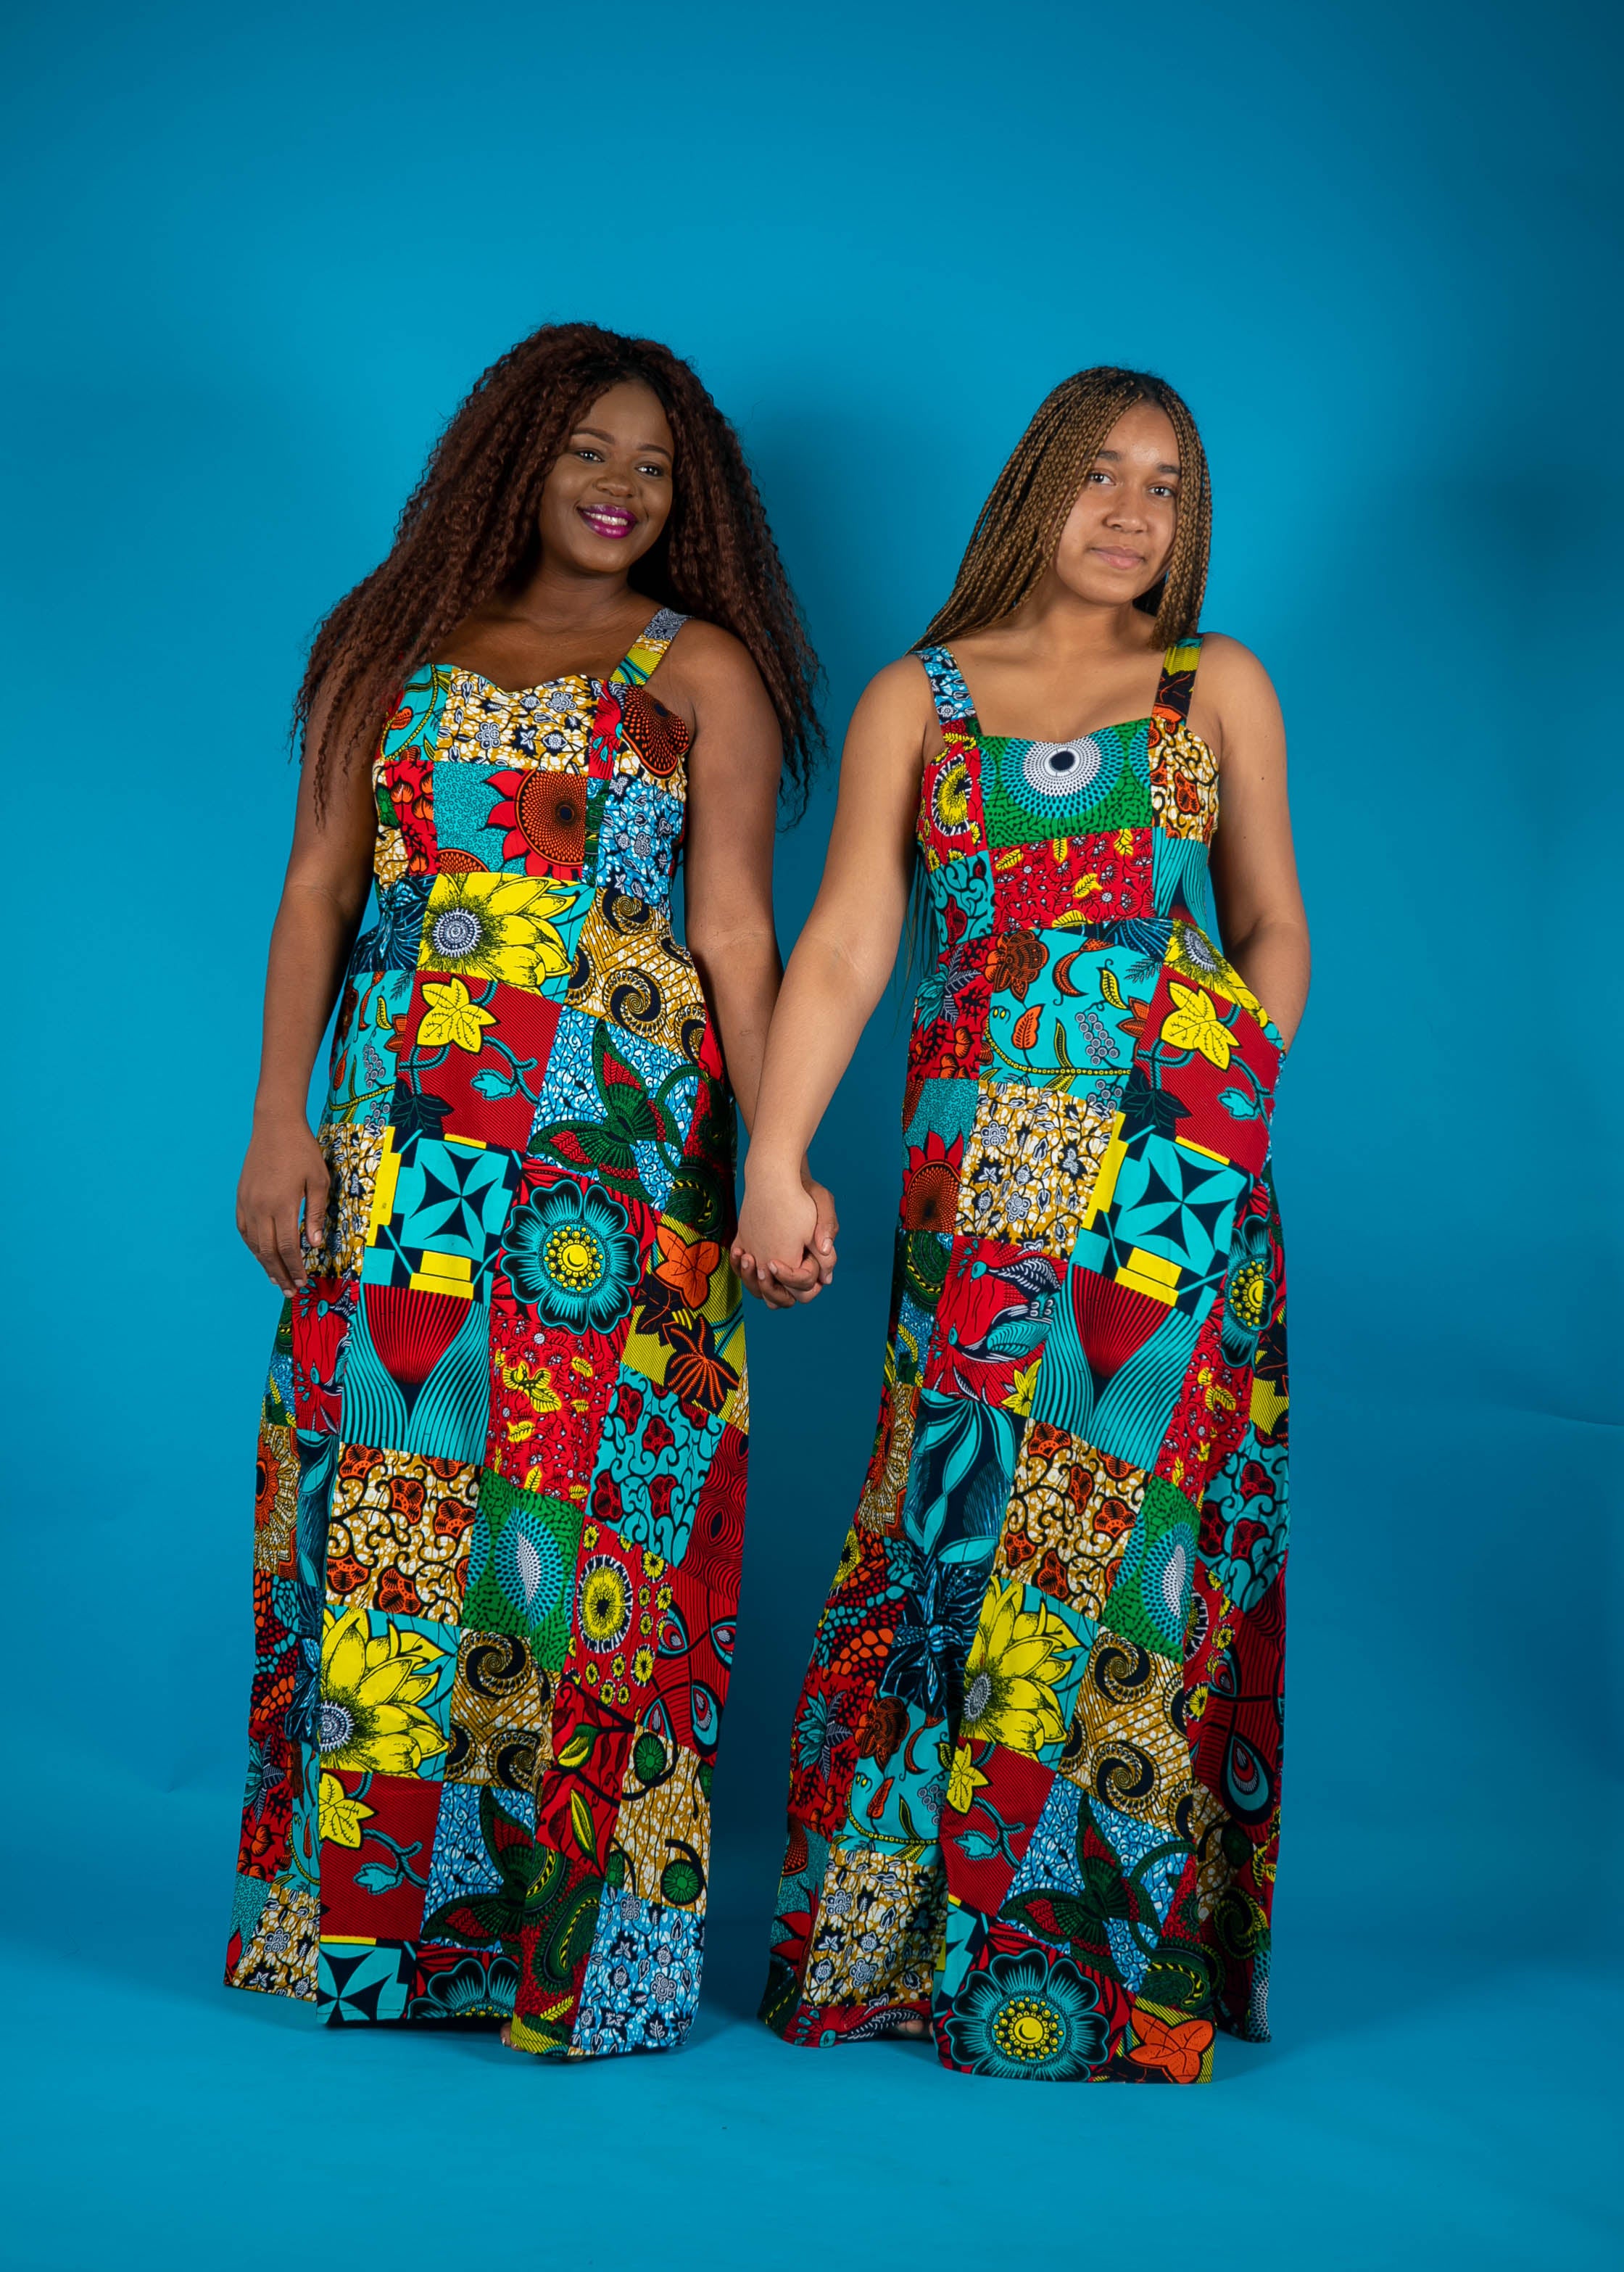 temad collections african print ankara patches spaghetti straps maxi a line dress, Stylish African print dresses, Modern African dresses, Ankara dress for ladies, Latest Ankara dresses, Long Ankara dresses, ankara dresses Uk. Ankara dresses styles, stylish Ankara dresses, beautiful African dresses, African Ankara dresses for ladies, African dresses styles, ankara print, ankara maxi dresses,Ankara midi dresses, Ankara short dresses, African maxi dress, , African midi dress, , African short dress 